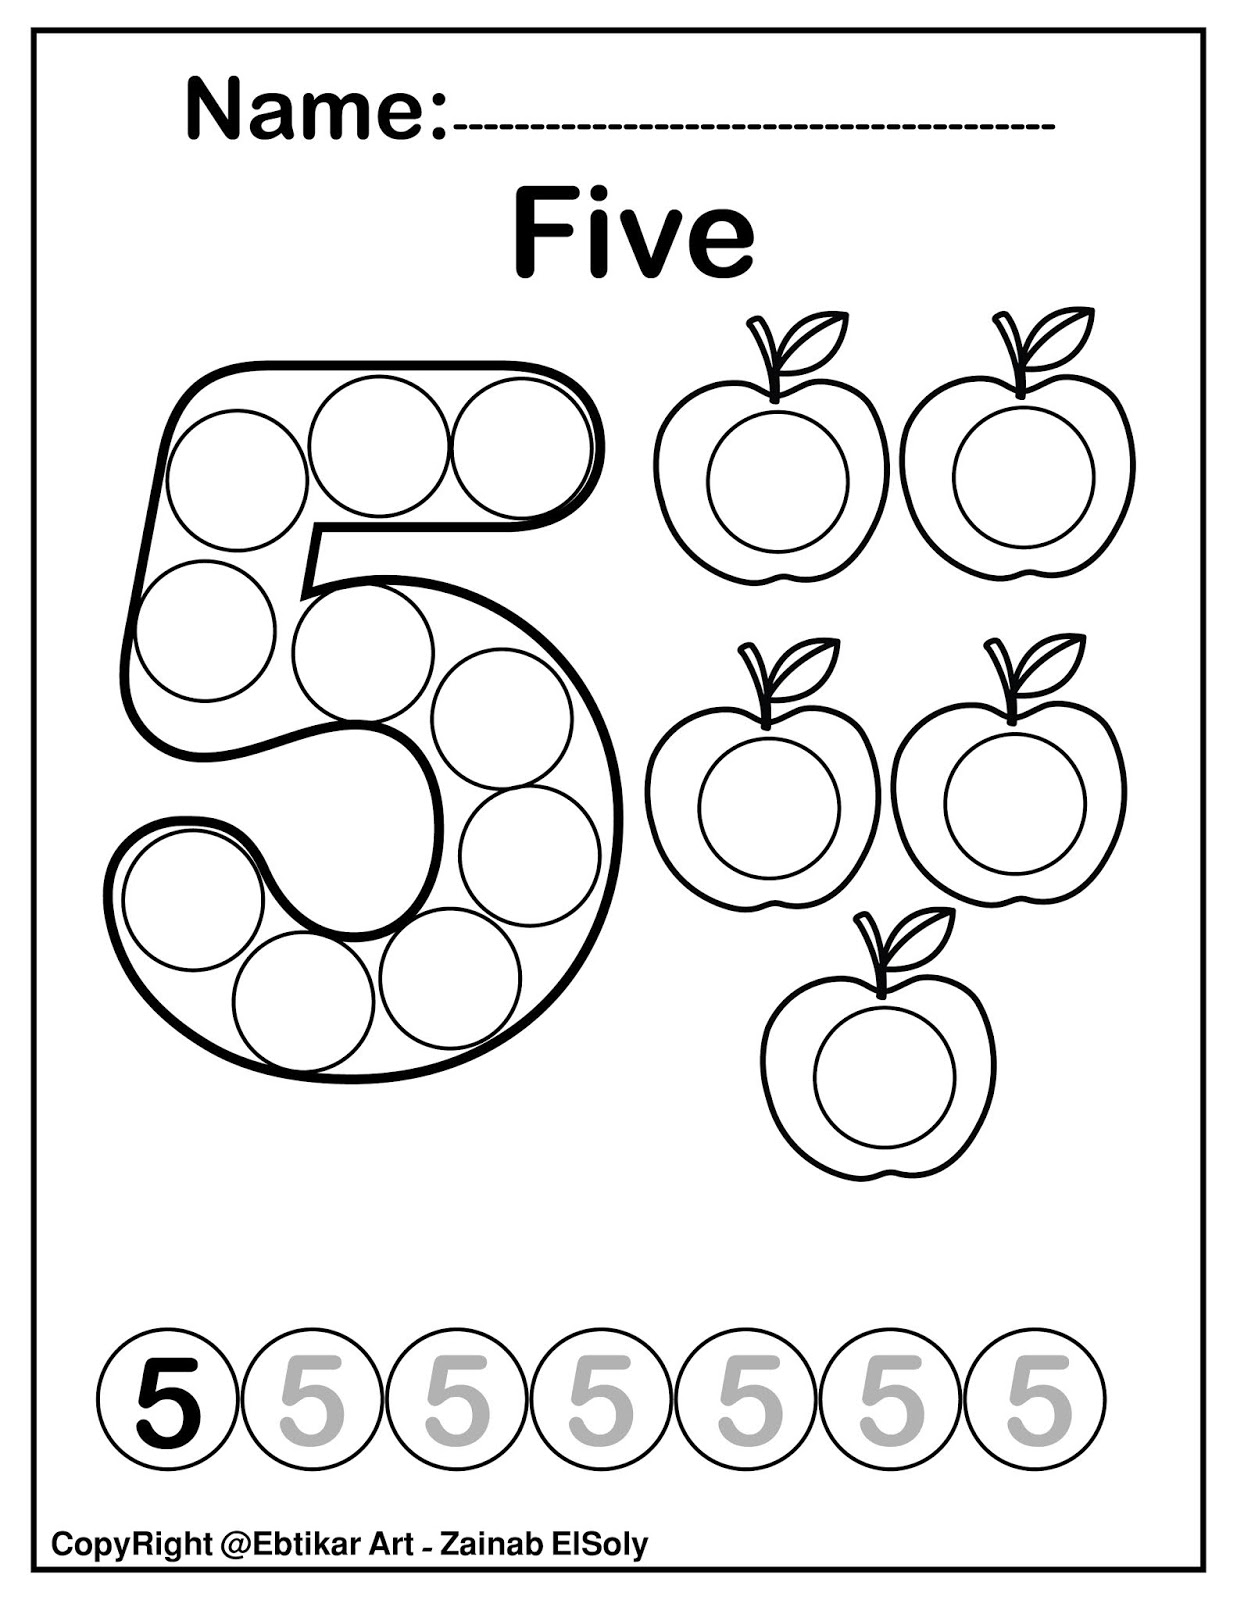 Set of 123 Numbers (Count Apples) Dot Marker Activity Coloring Pages